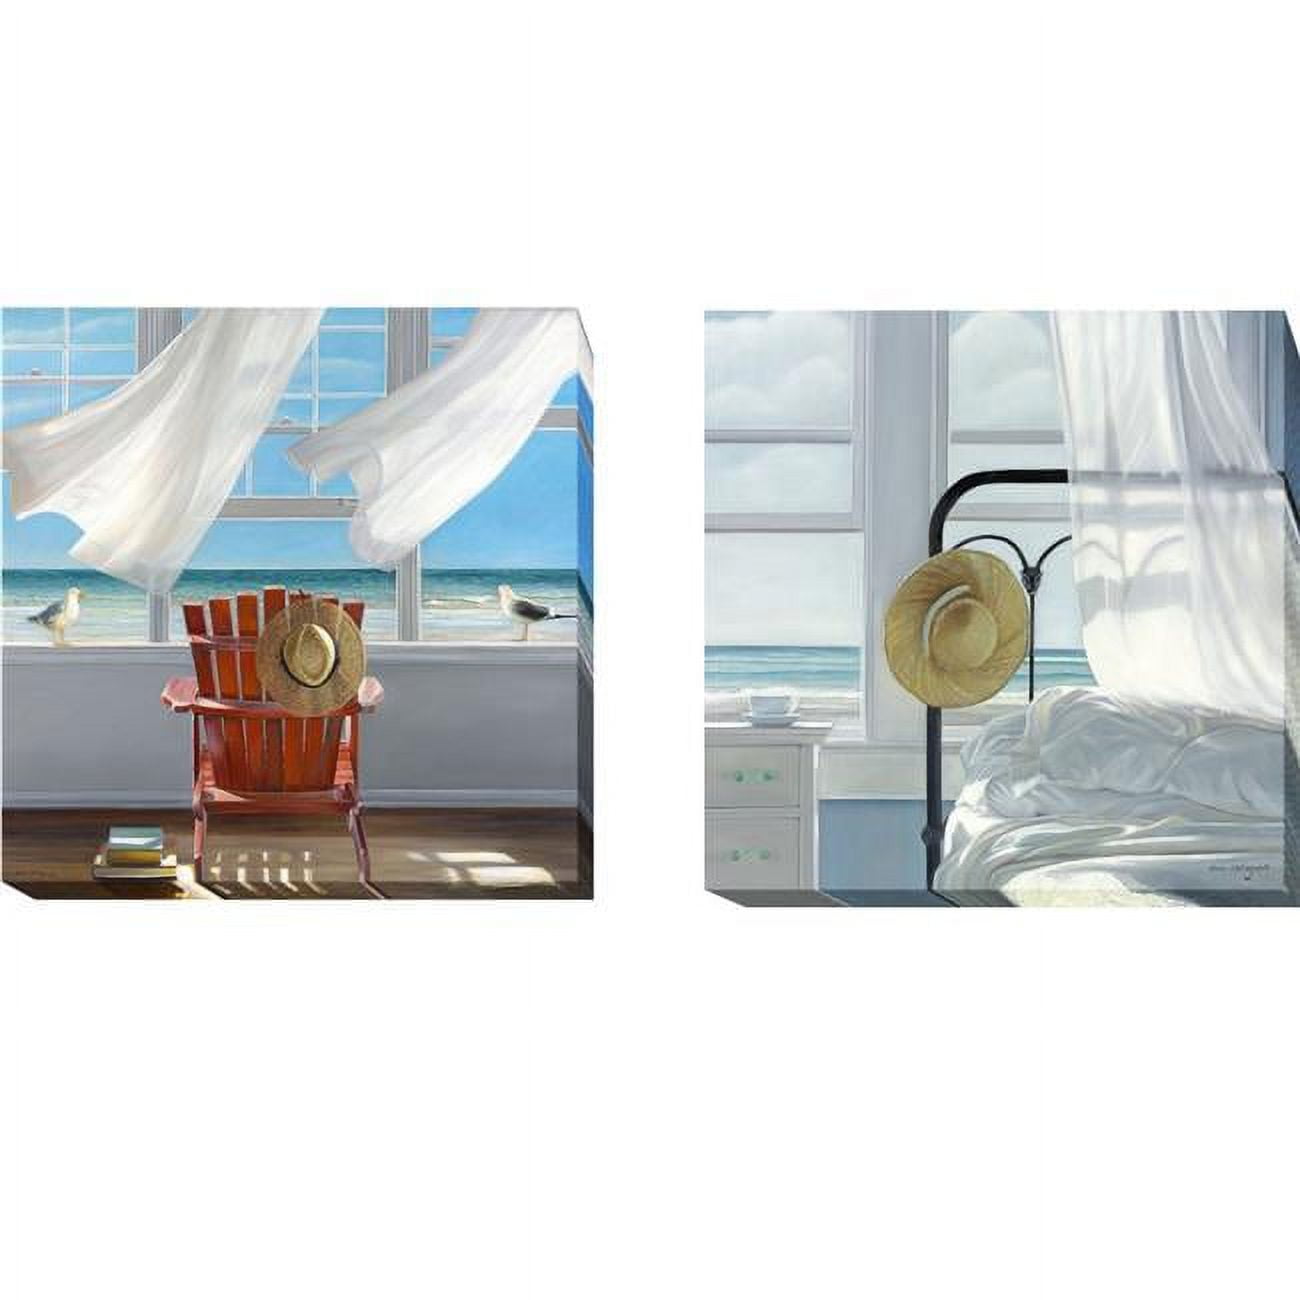 1212v739ig Lookout & Sand In The Sheets By Karen Hollingsworth 2-piece Gallery-wrapped Canvas Giclee Art Set - 12 X 12 X 1.5 In.